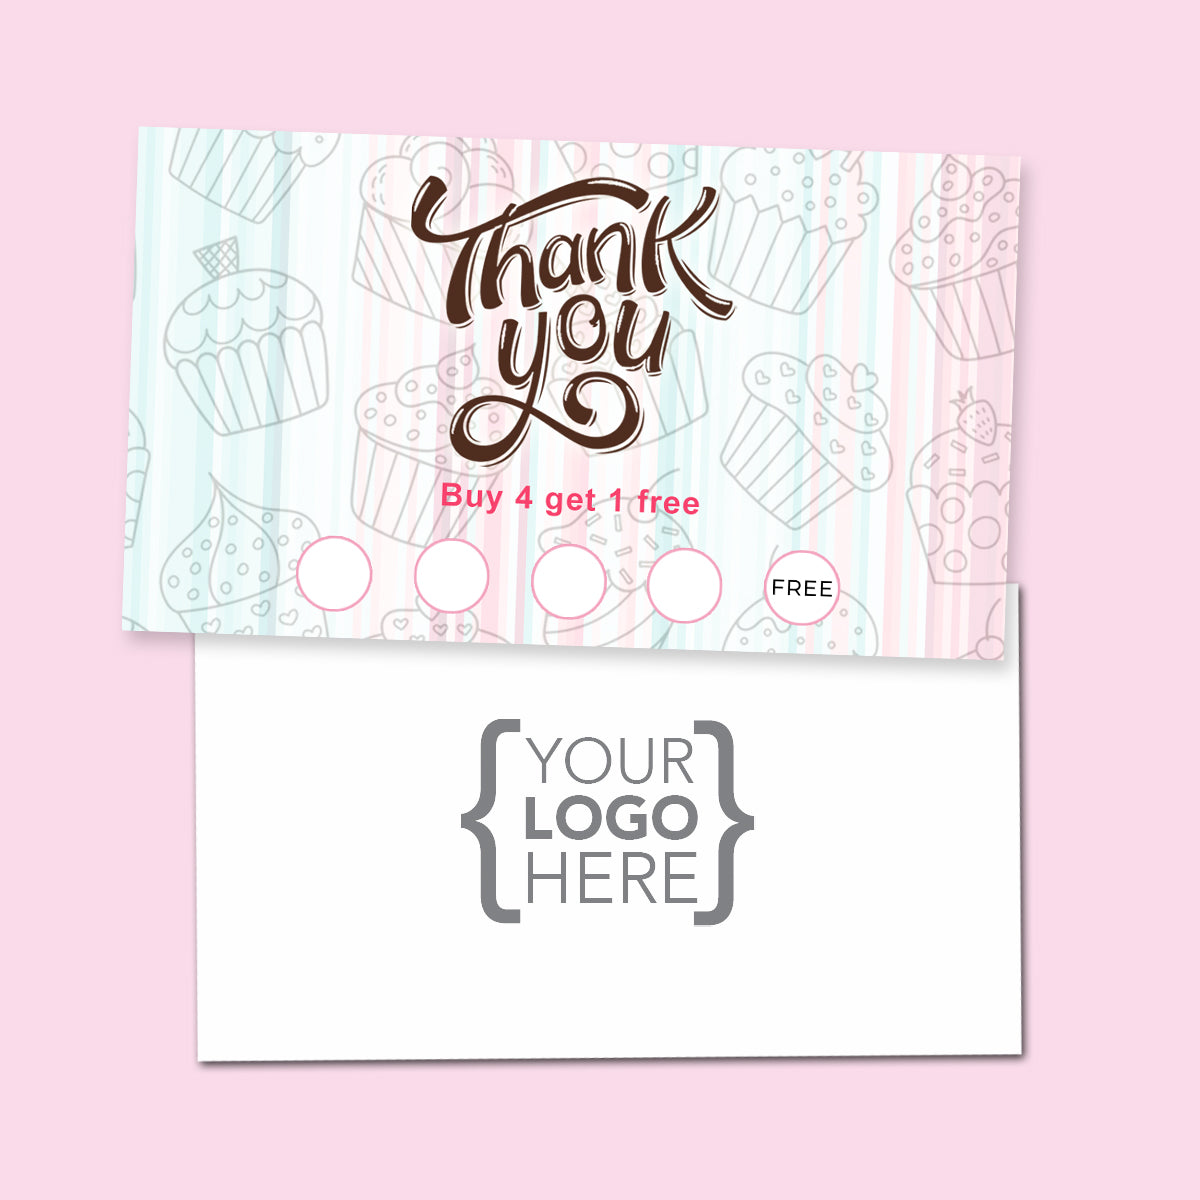 10% Sale Cupcakes & Sweets Stamp Card